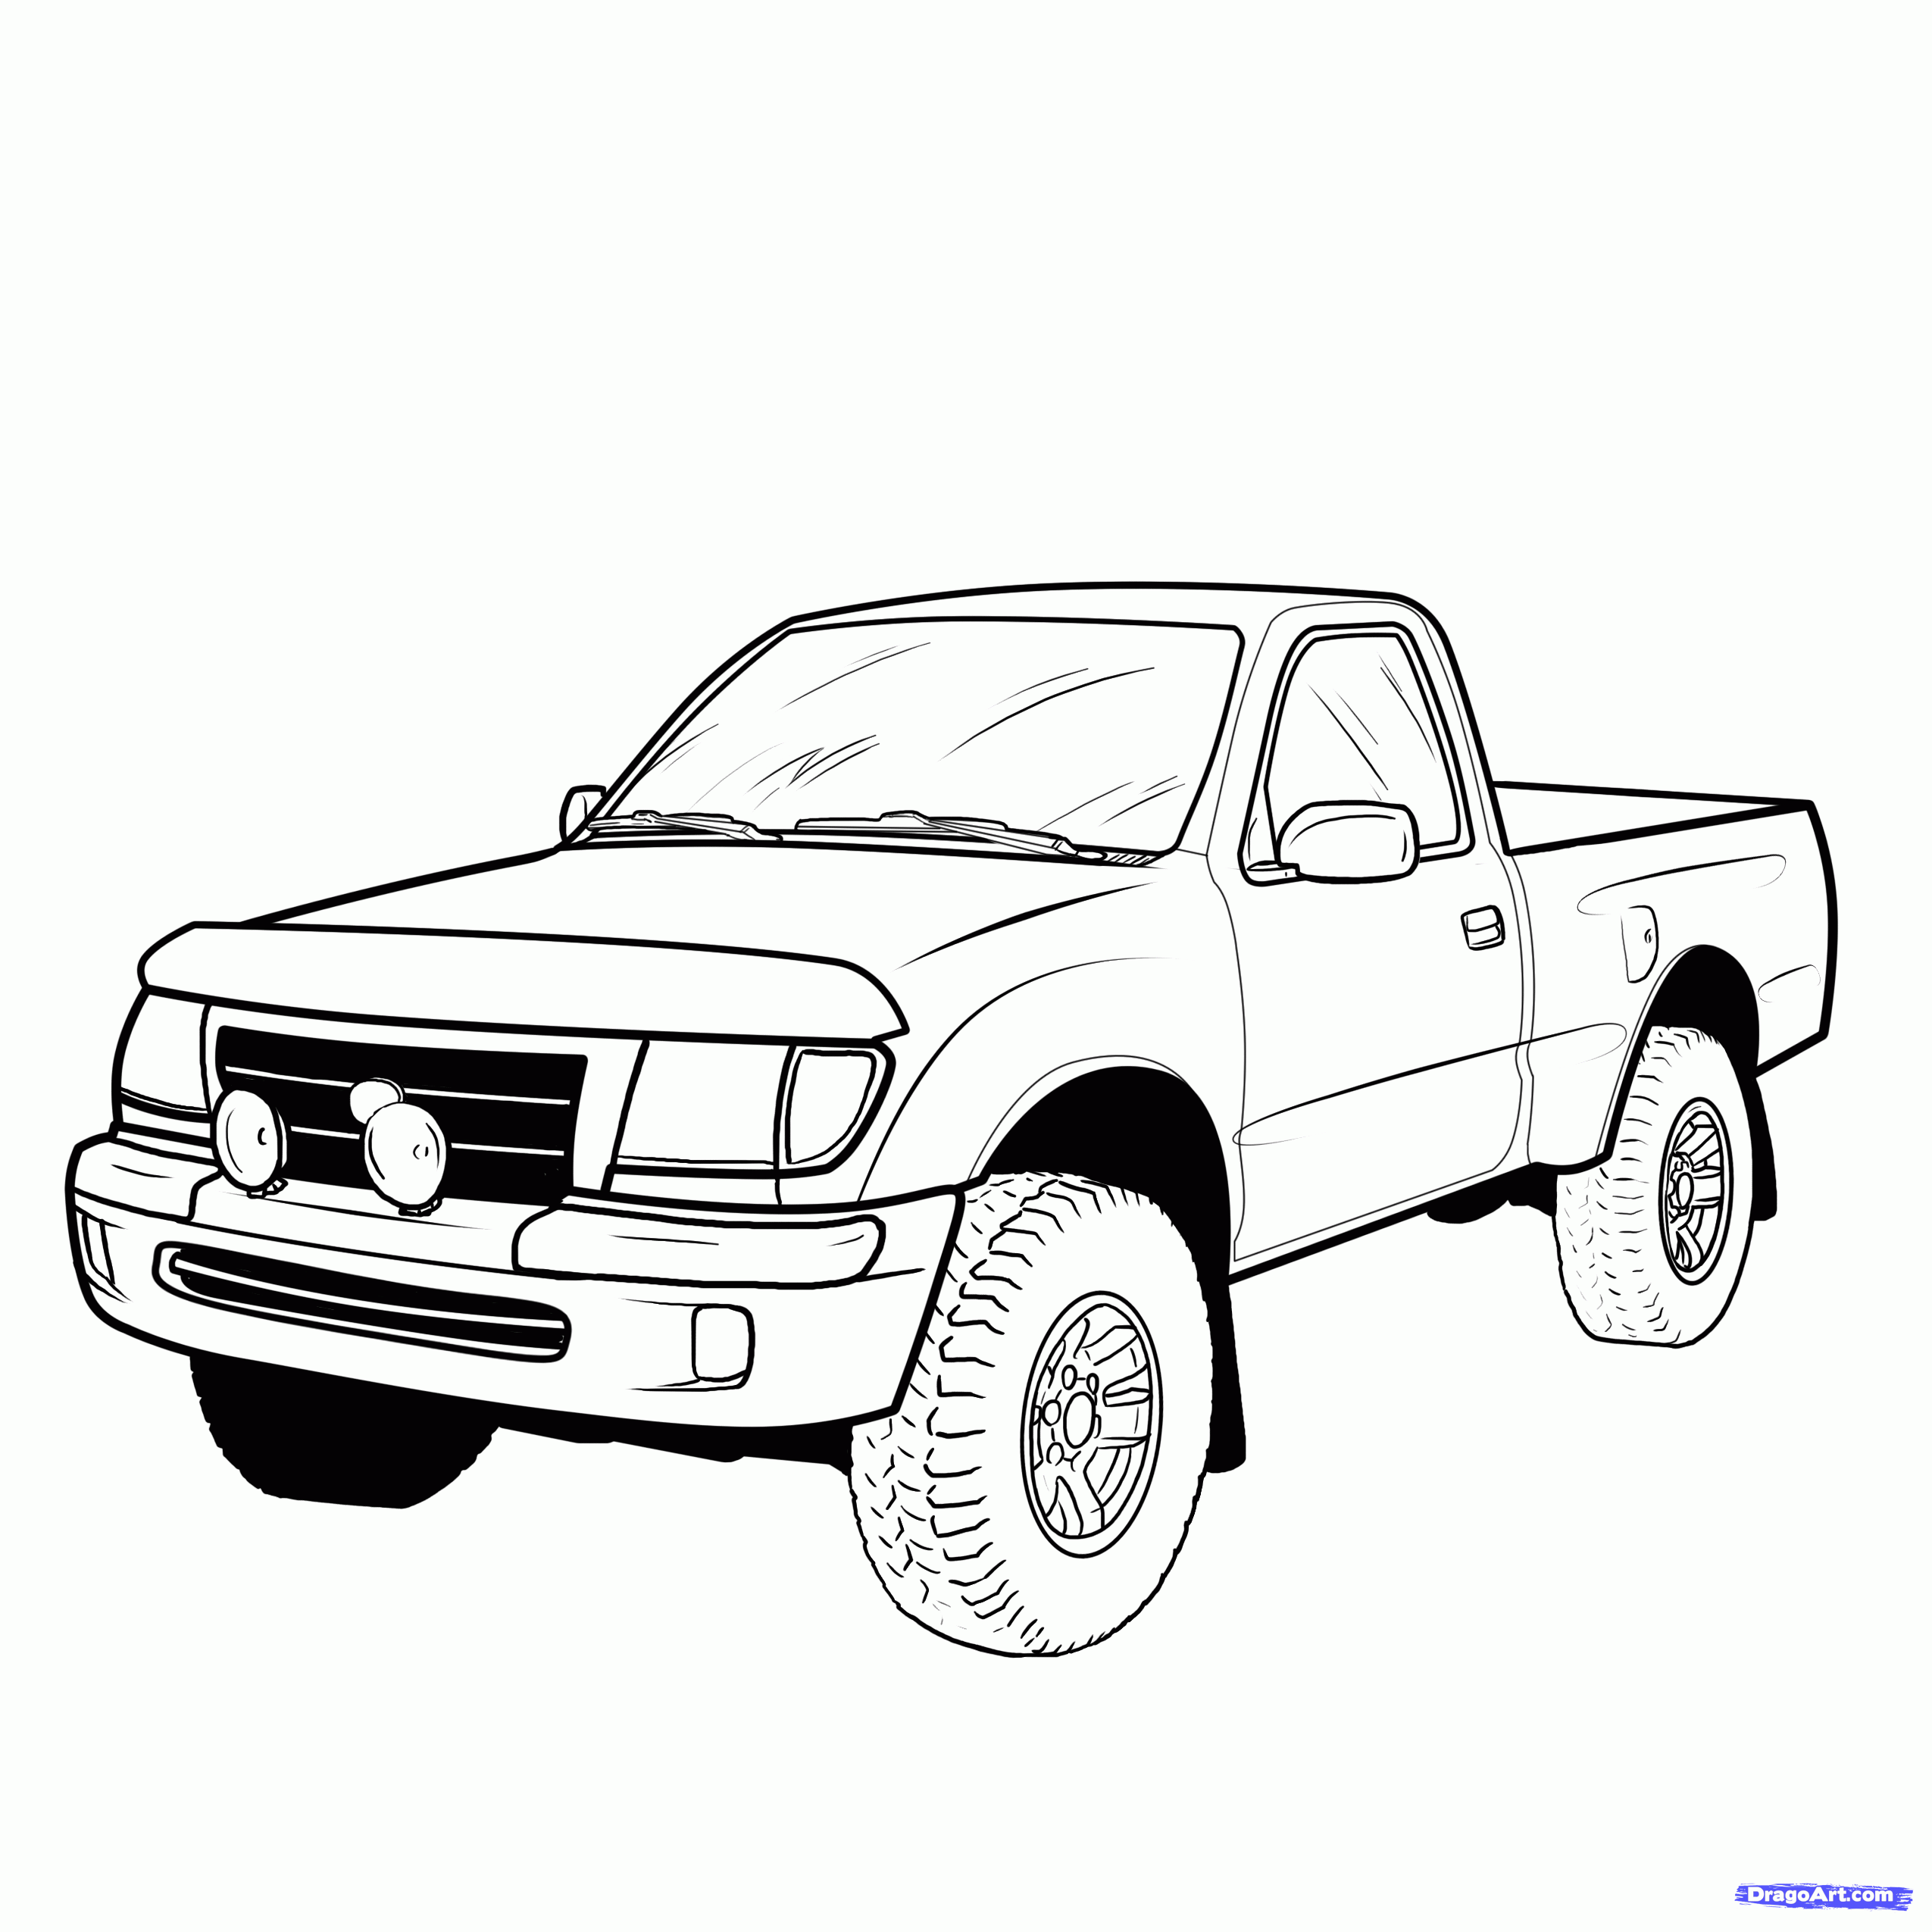 Truck Drawings For Kids - Cliparts.co